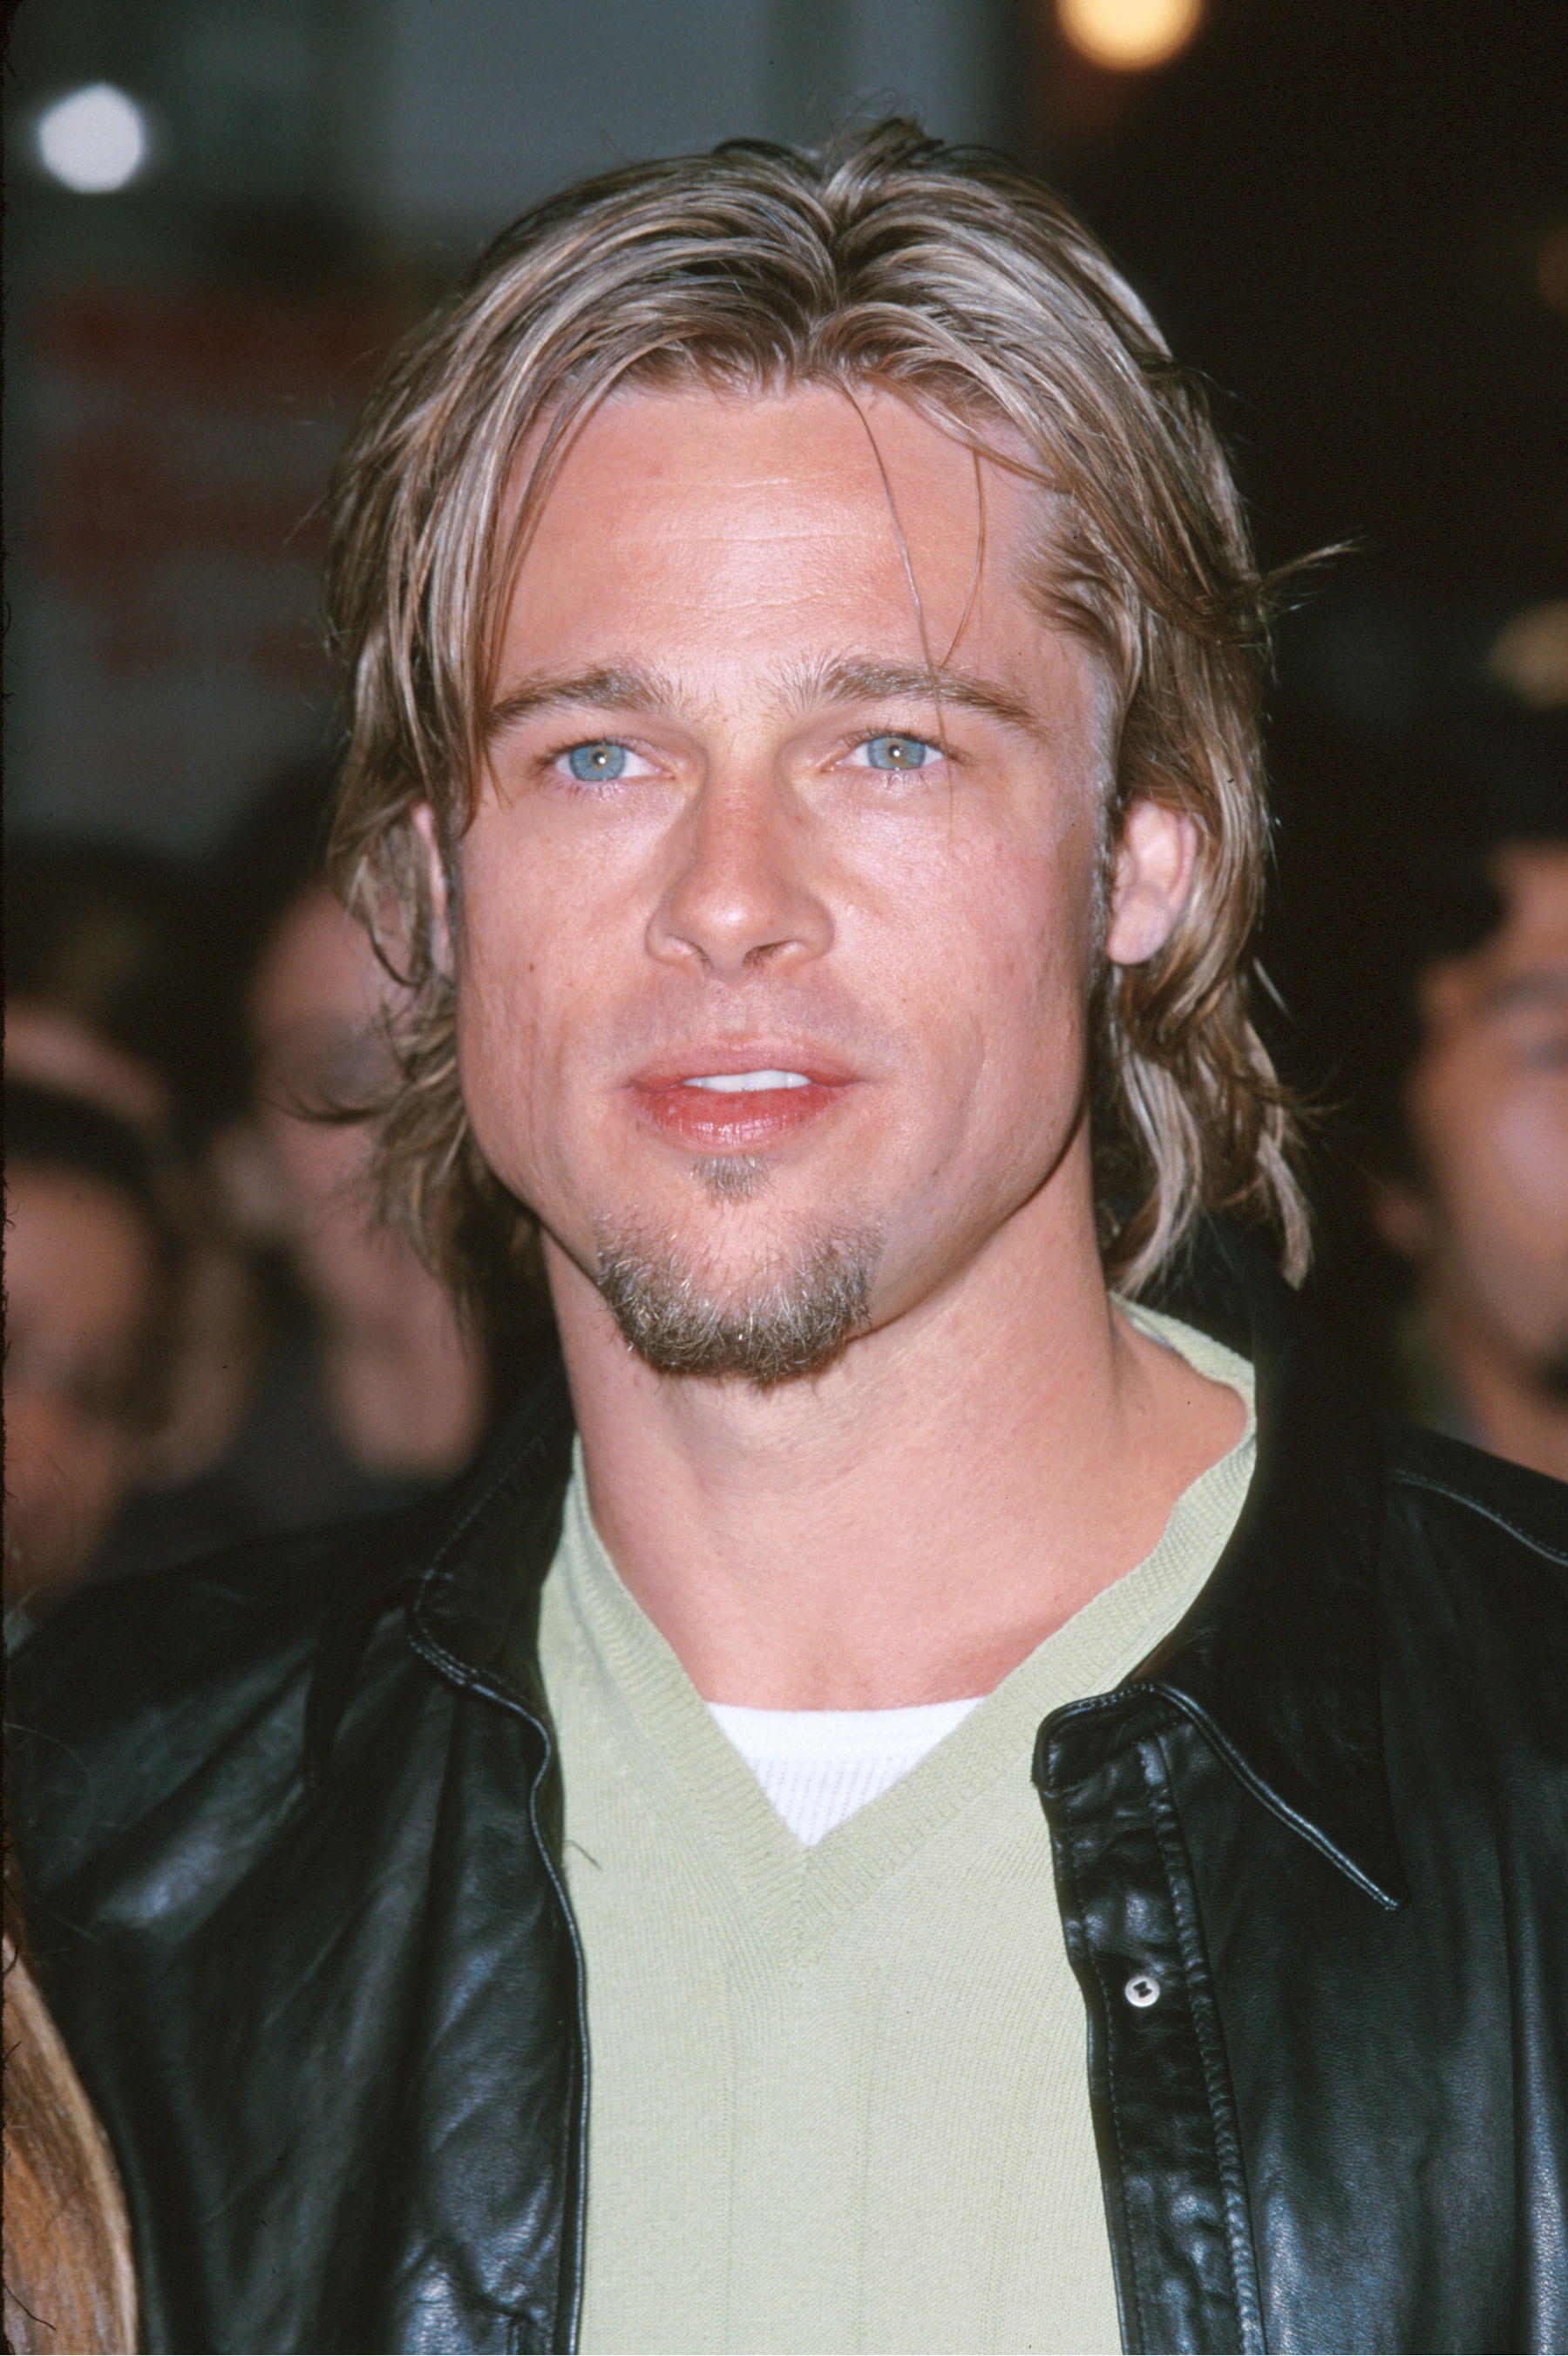 Brad Pitt during "Erin Brockovich" Premiere at Mann Village Theatre in Westwood, California on March 14, 2000. | Source: Getty Images